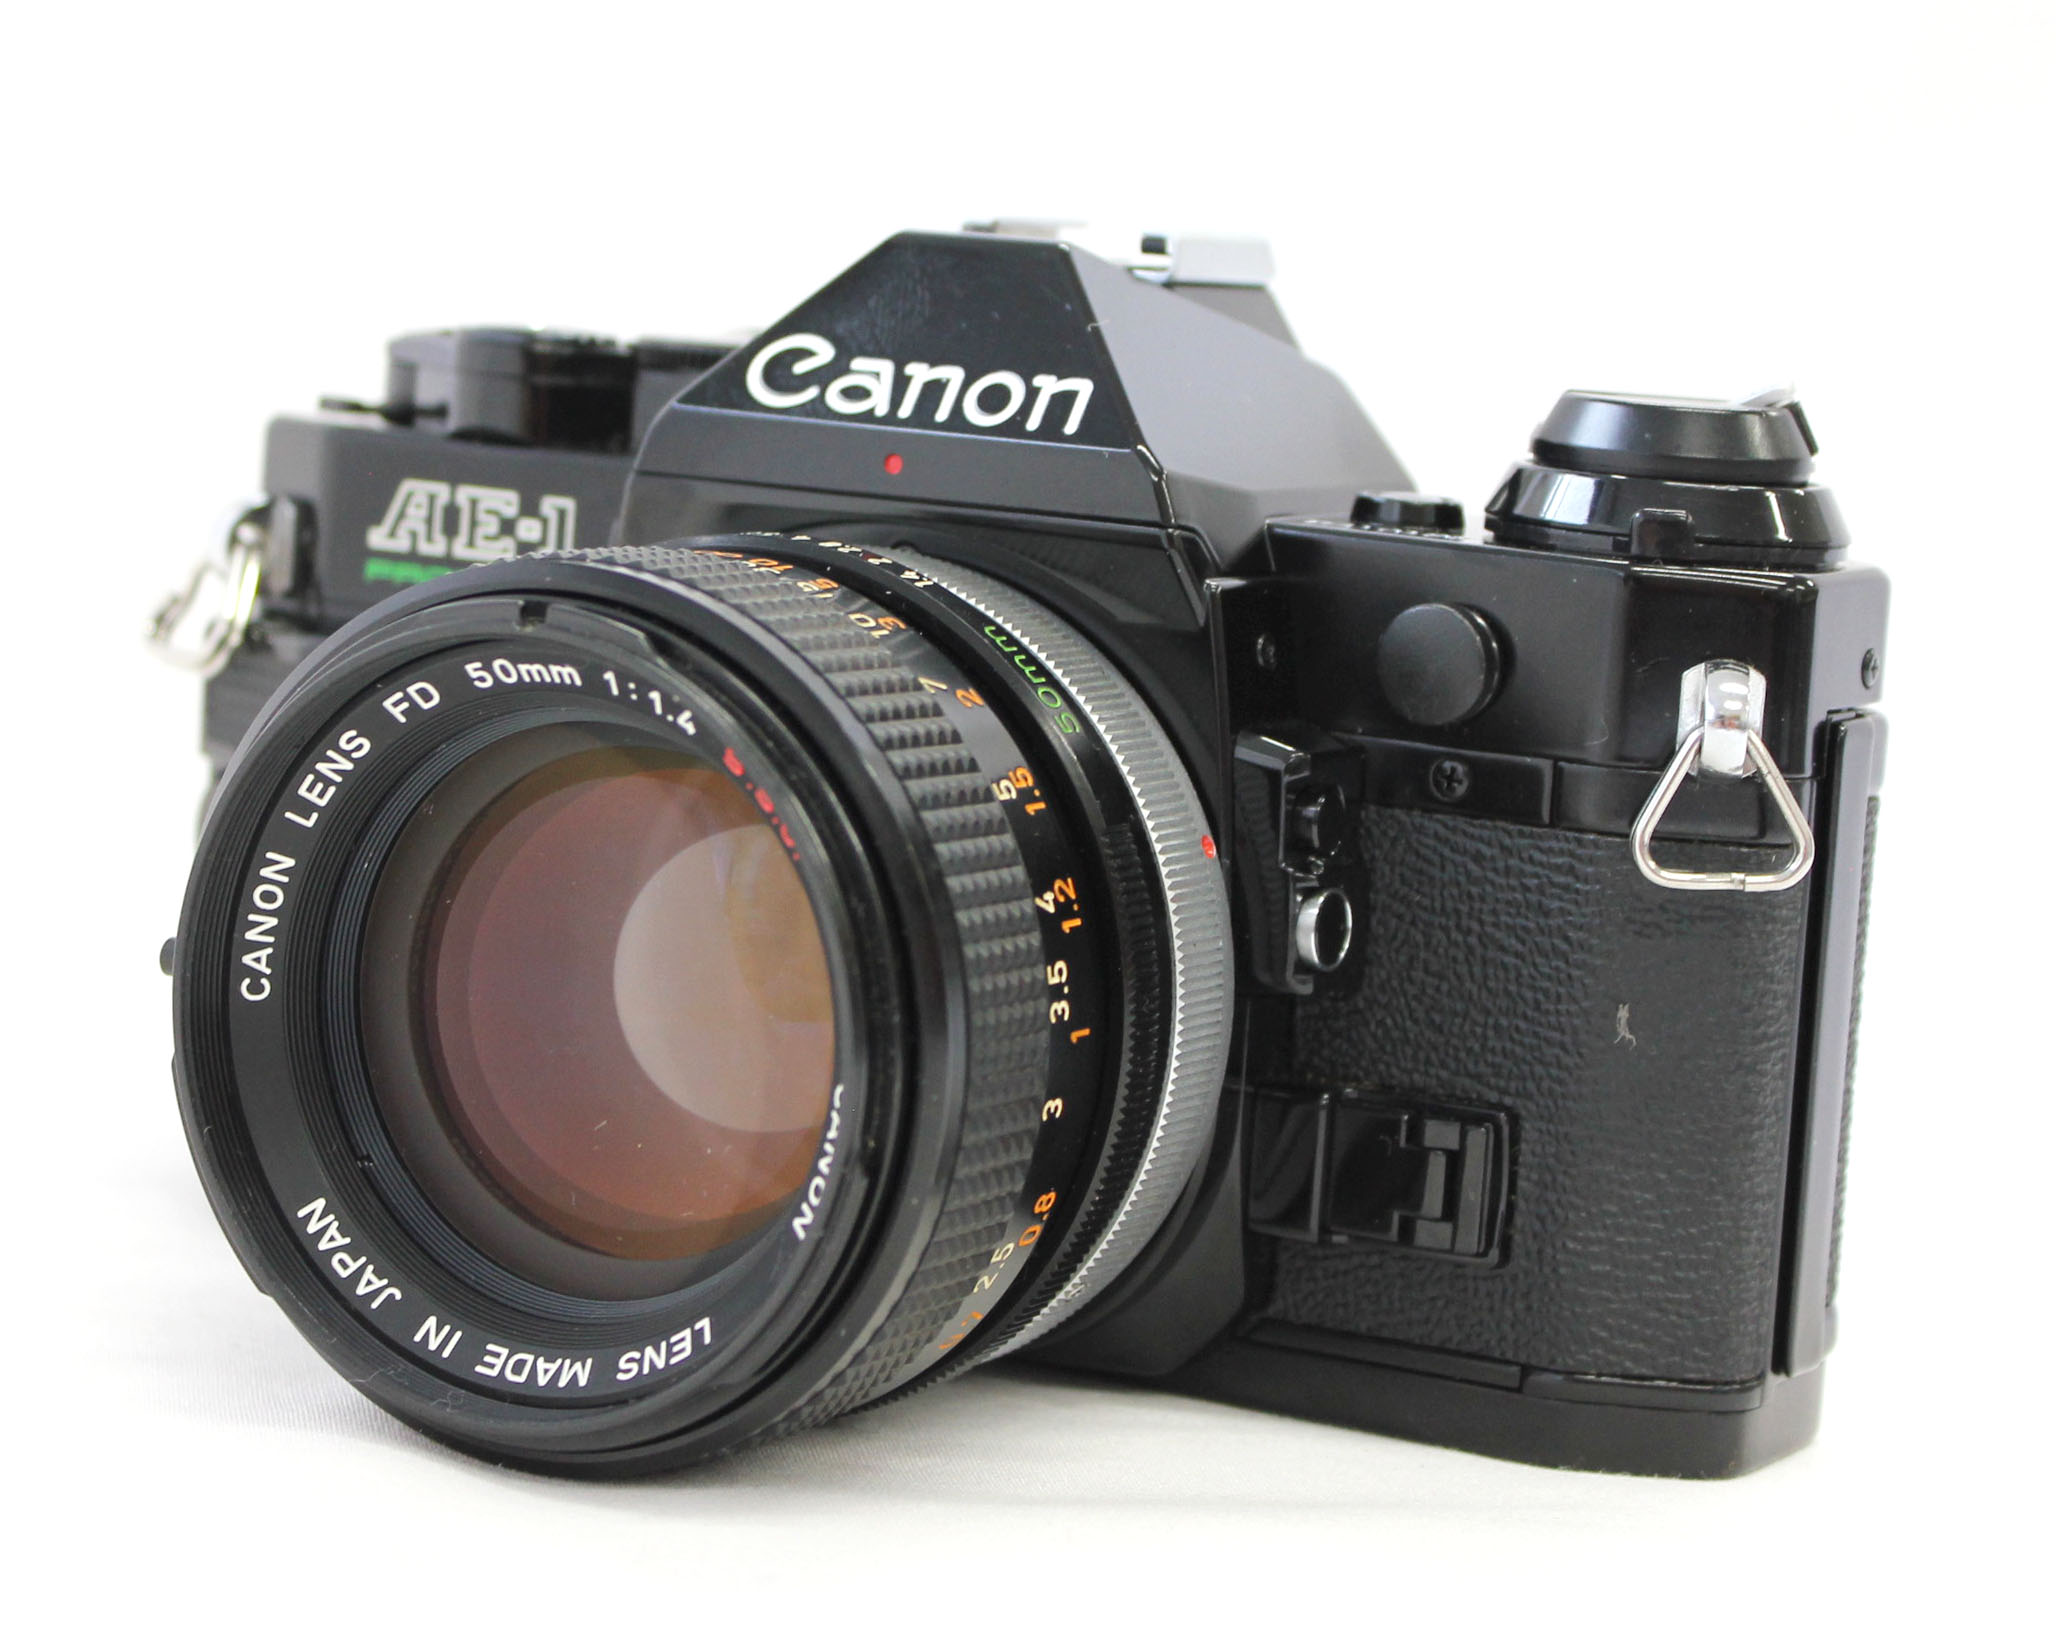 [Excellent+++++] Canon AE-1 Program 35mm SLR Film Camera Black with FD 50mm F/1.4 S.S.C. Rare "O" Lens from Japan